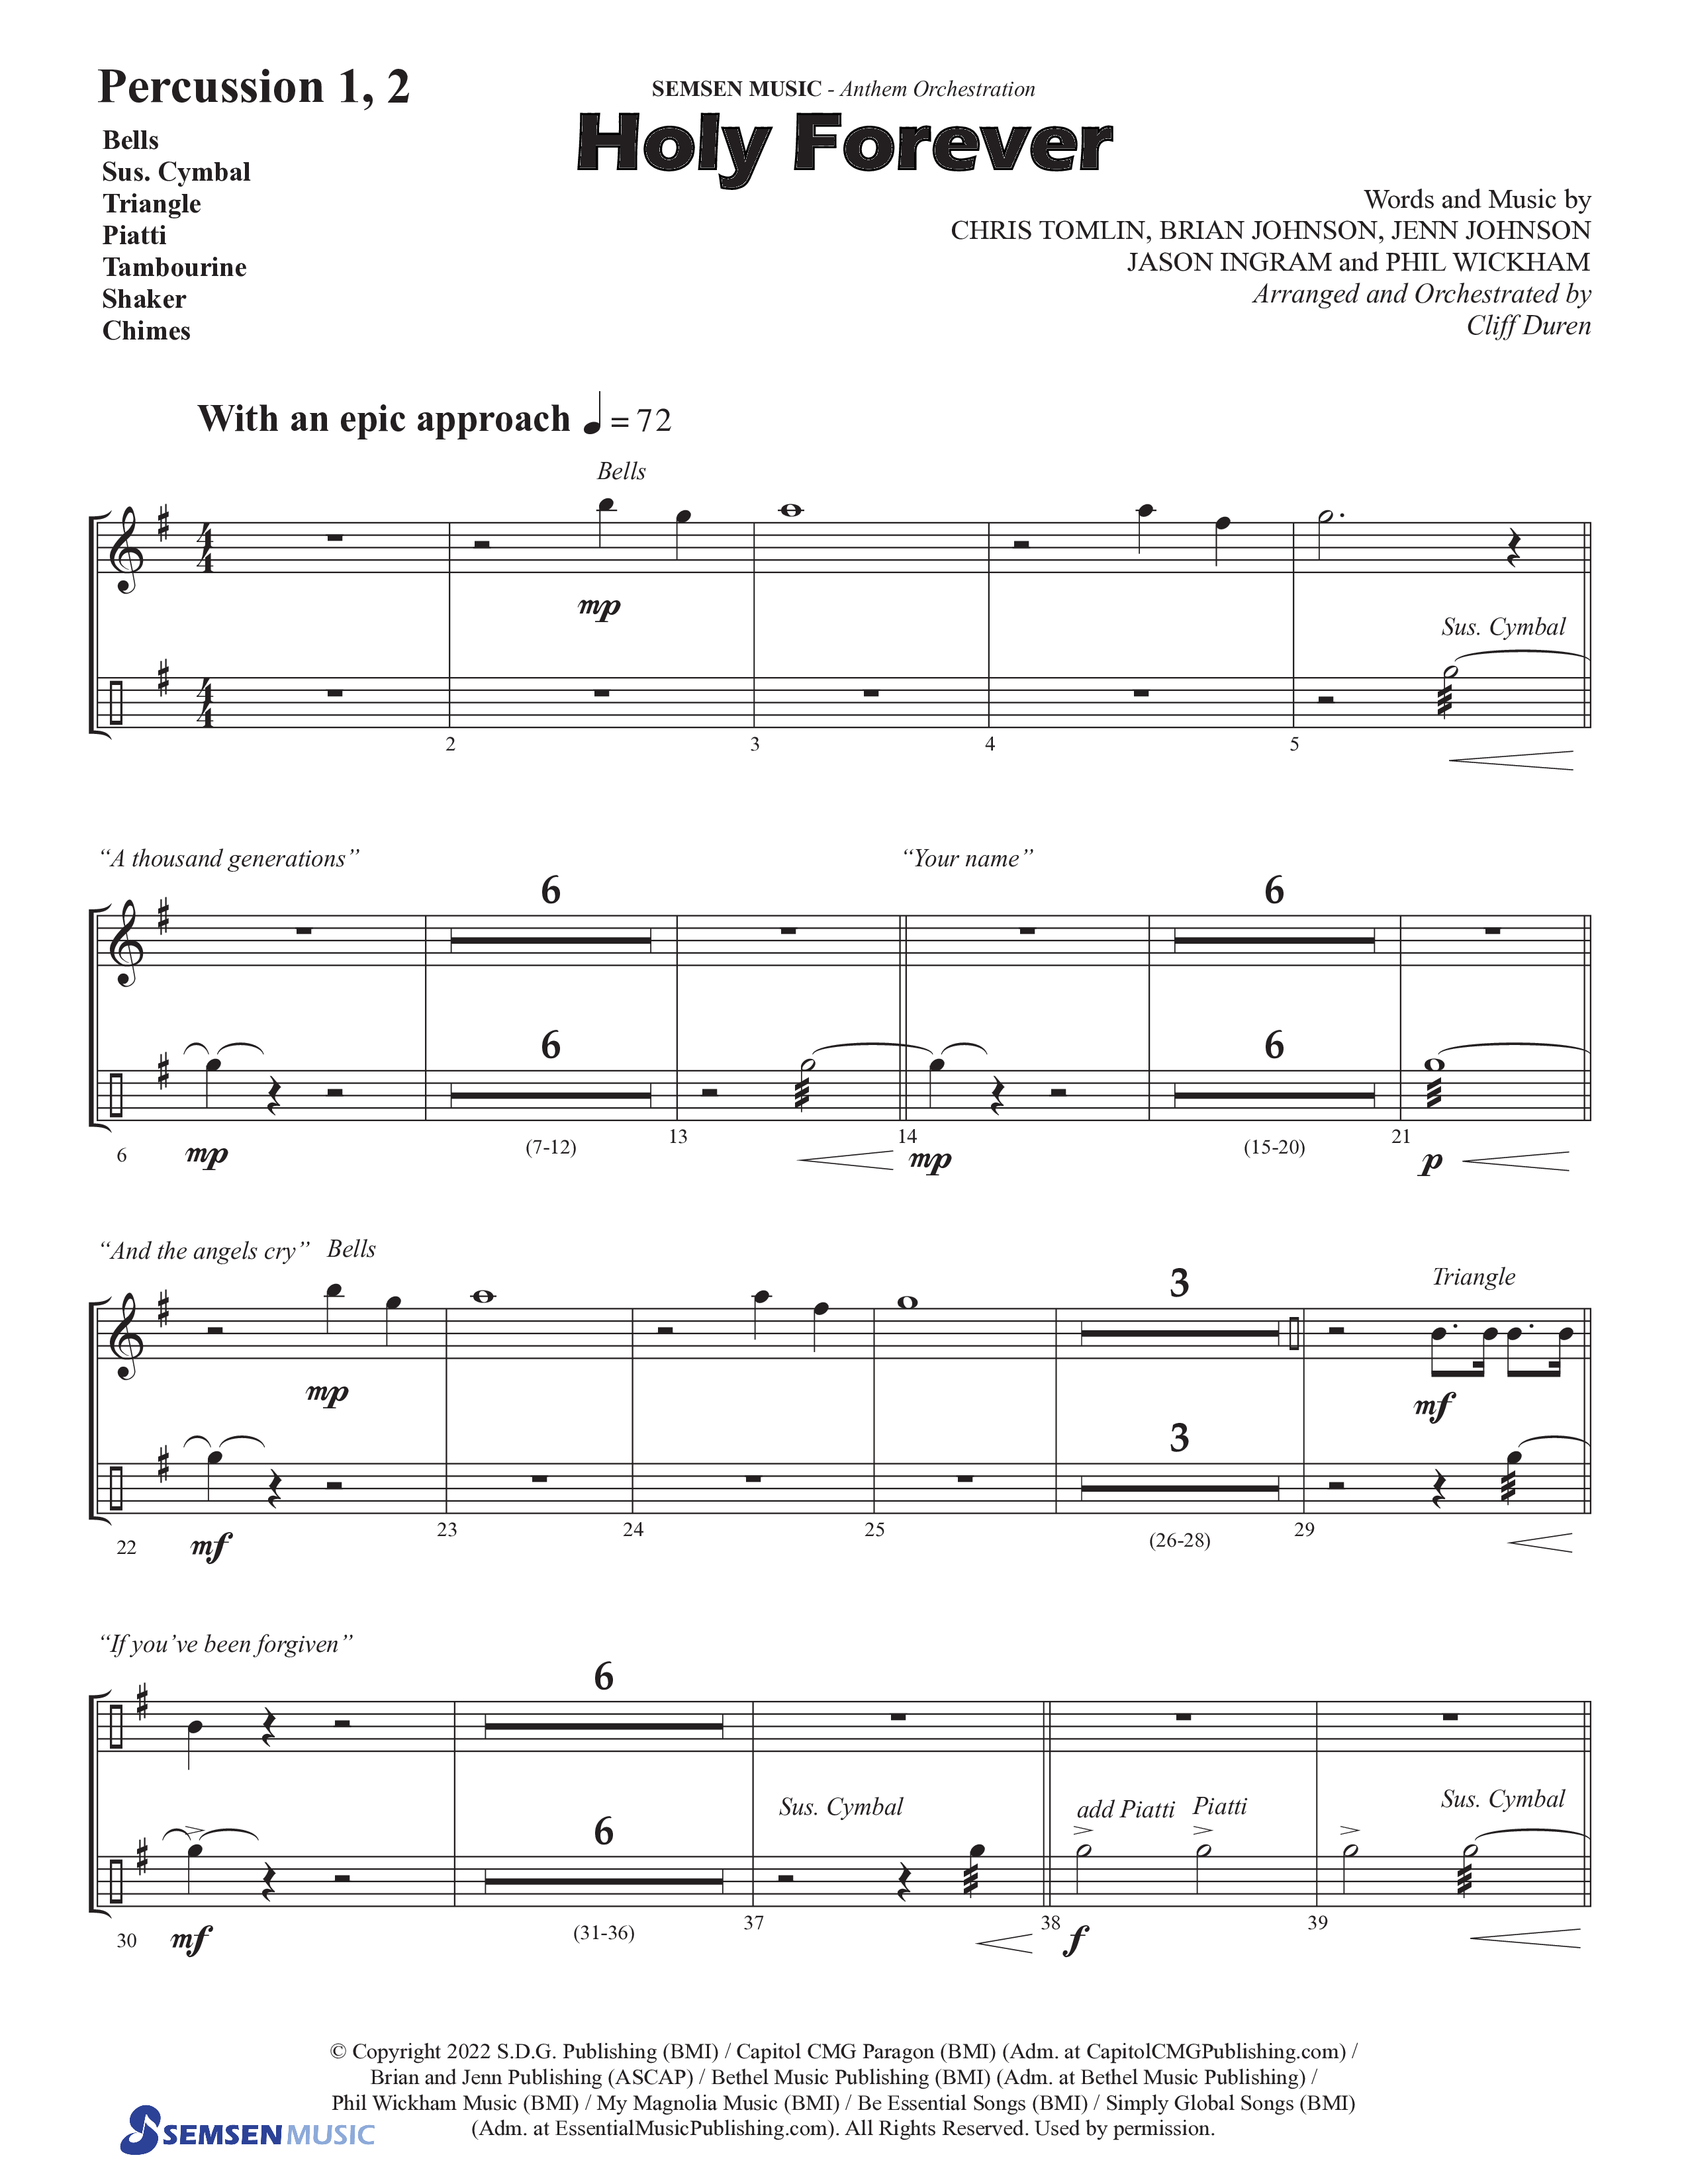 Holy Forever (Choral Anthem SATB) Percussion 1/2 (Semsen Music / Arr. Cliff Duren)